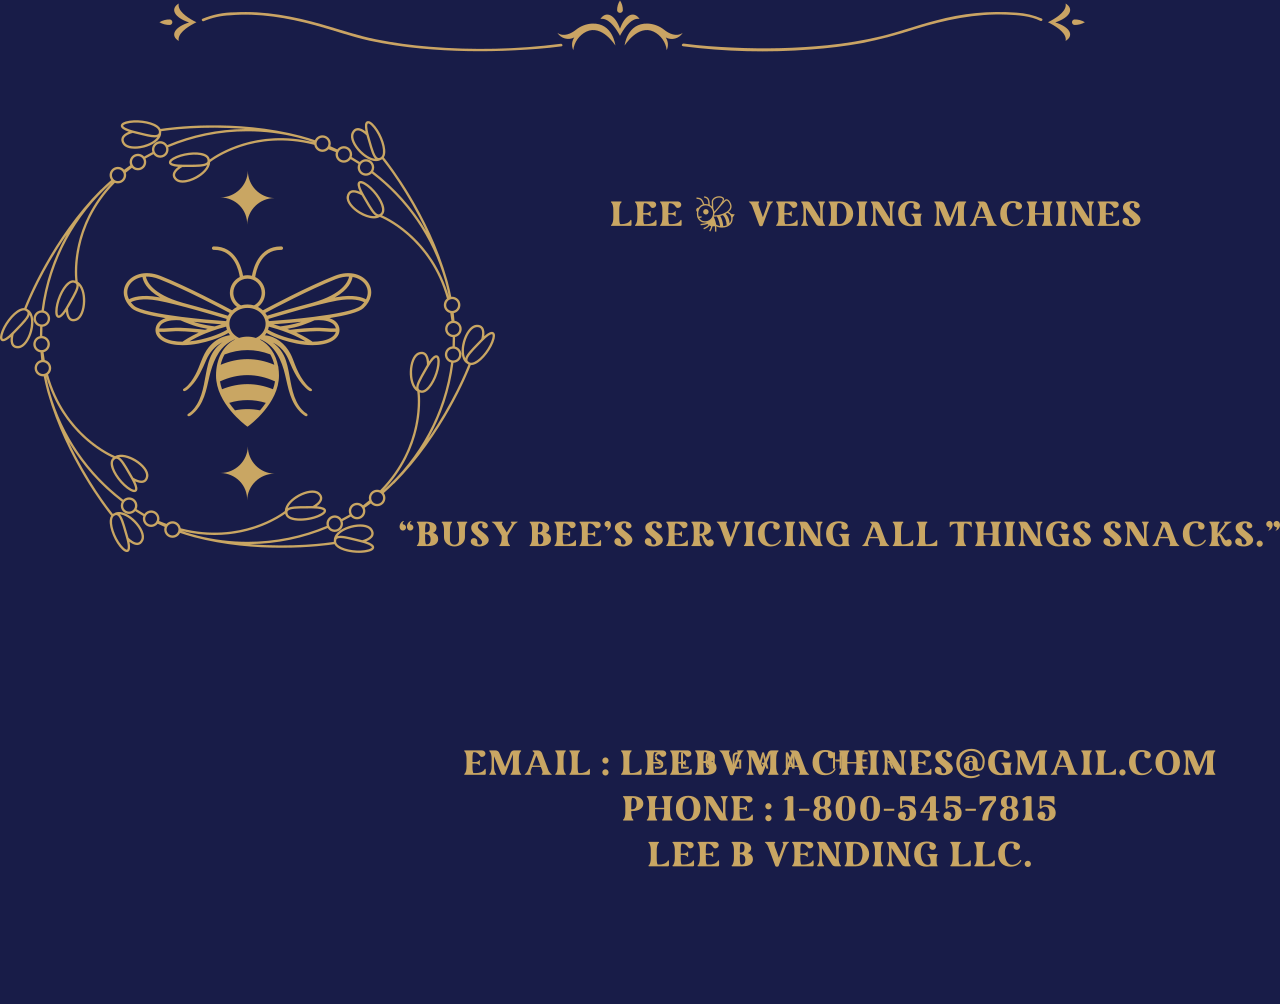         Lee 🐝 Vending Machines






“Busy Bee’s Servicing All Things Snacks.”




Email : LeeBVMachines@gmail.com
Phone : 1-800-545-7815
Lee B Vending LLC.


's web page